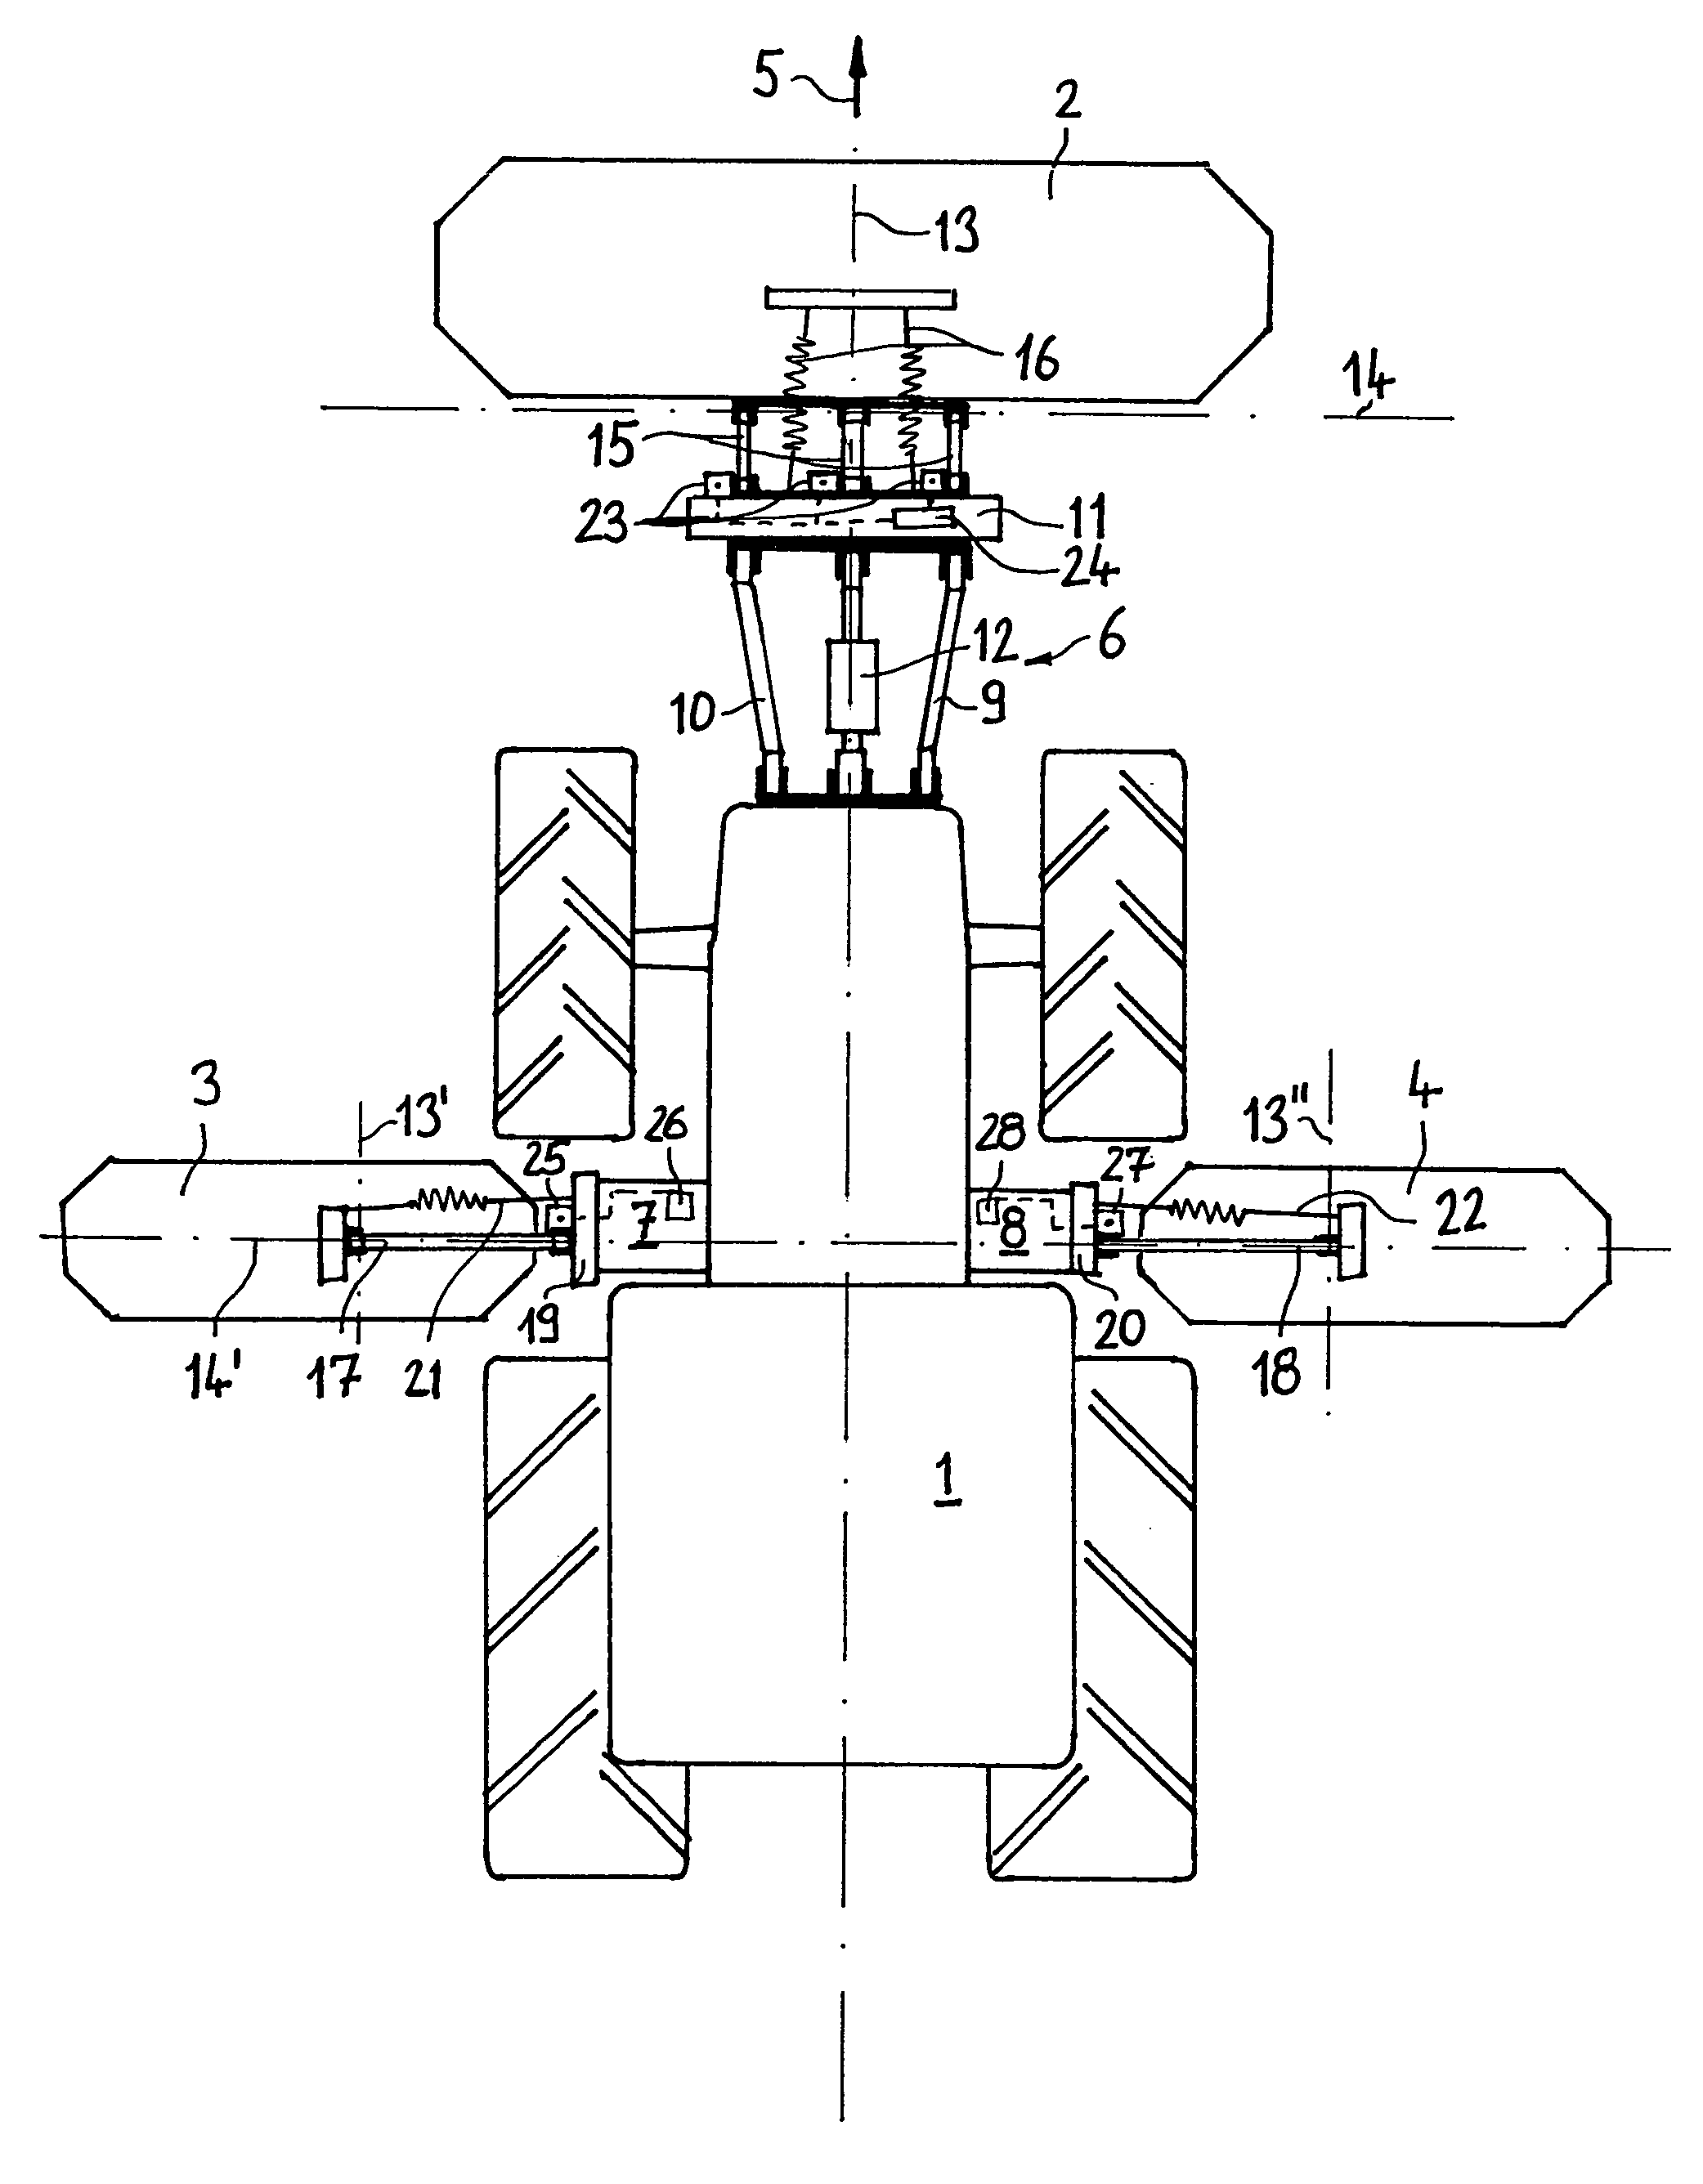 Device for controlling the position of a mountable implement relative to an implement carrier element